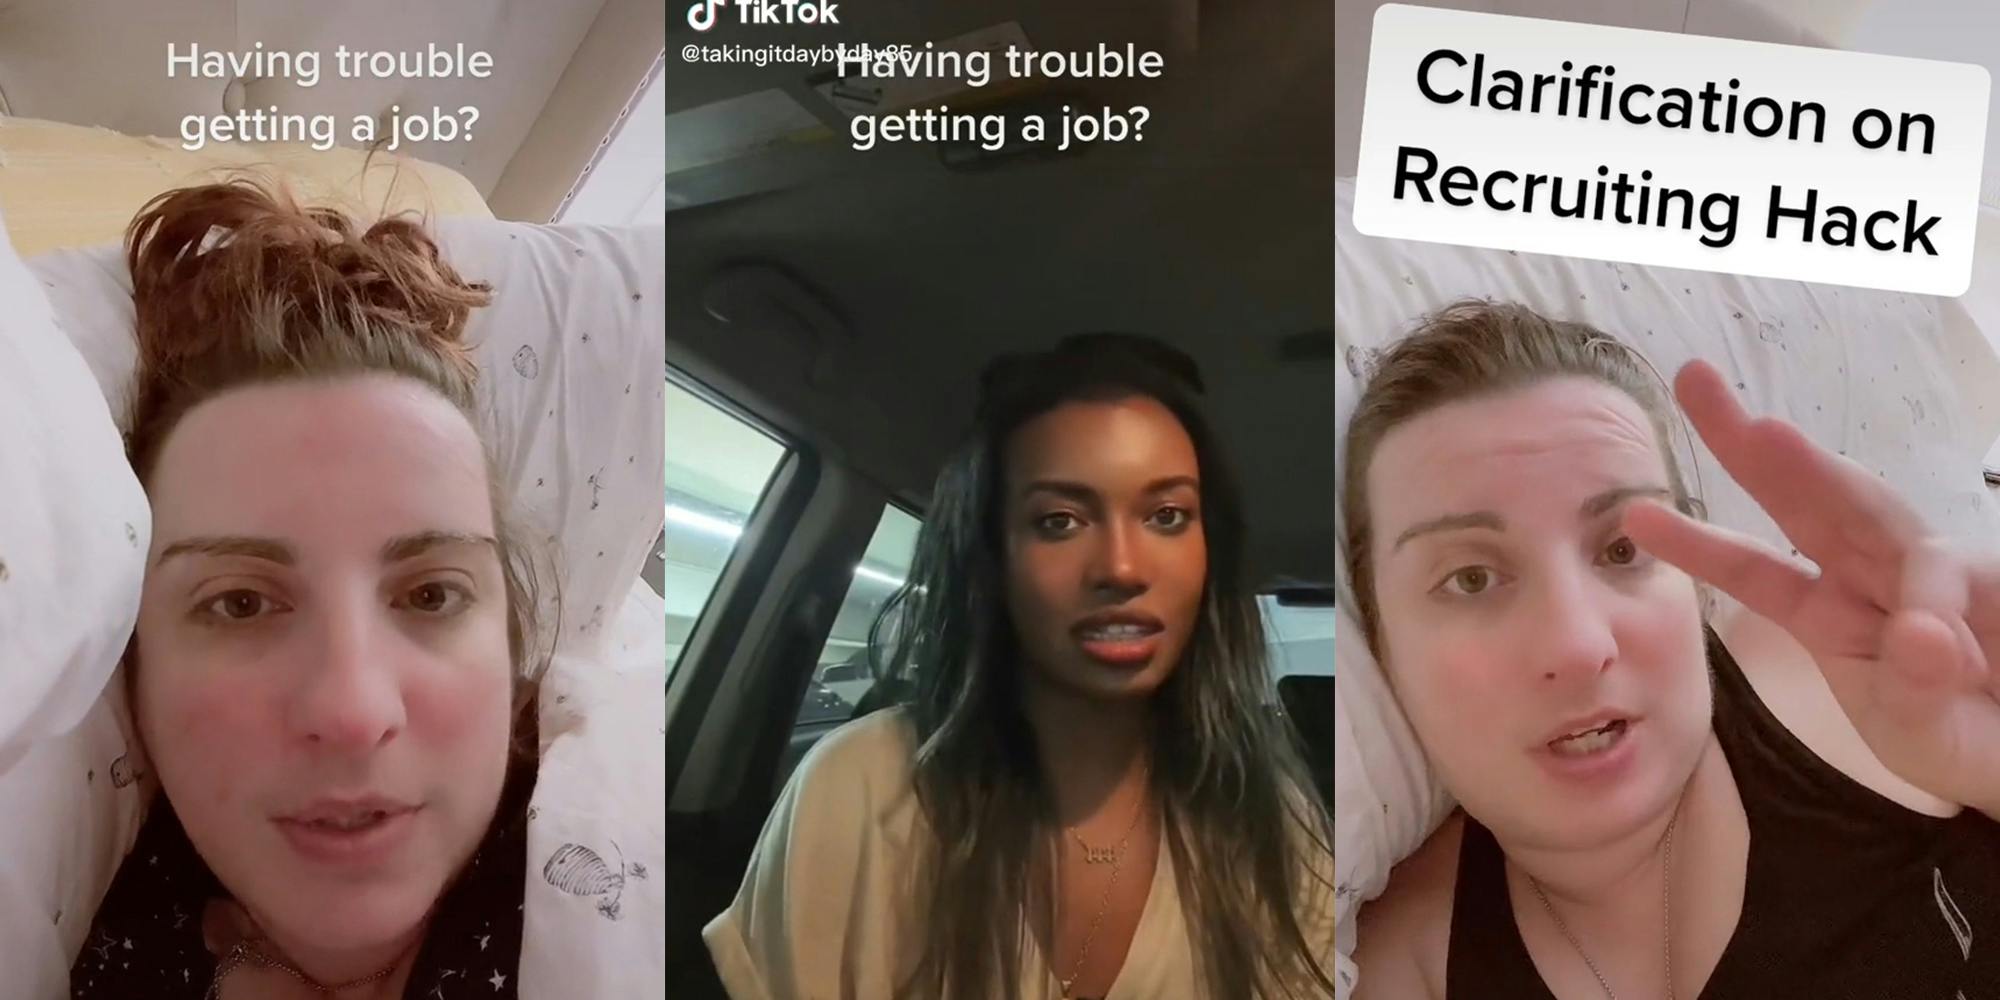 young woman in bed with caption "having trouble getting a job?" (l) young woman in car with caption "having trouble getting a job?" (c) young woman in bed with caption "Clarification on Recruiting Hack" (r)